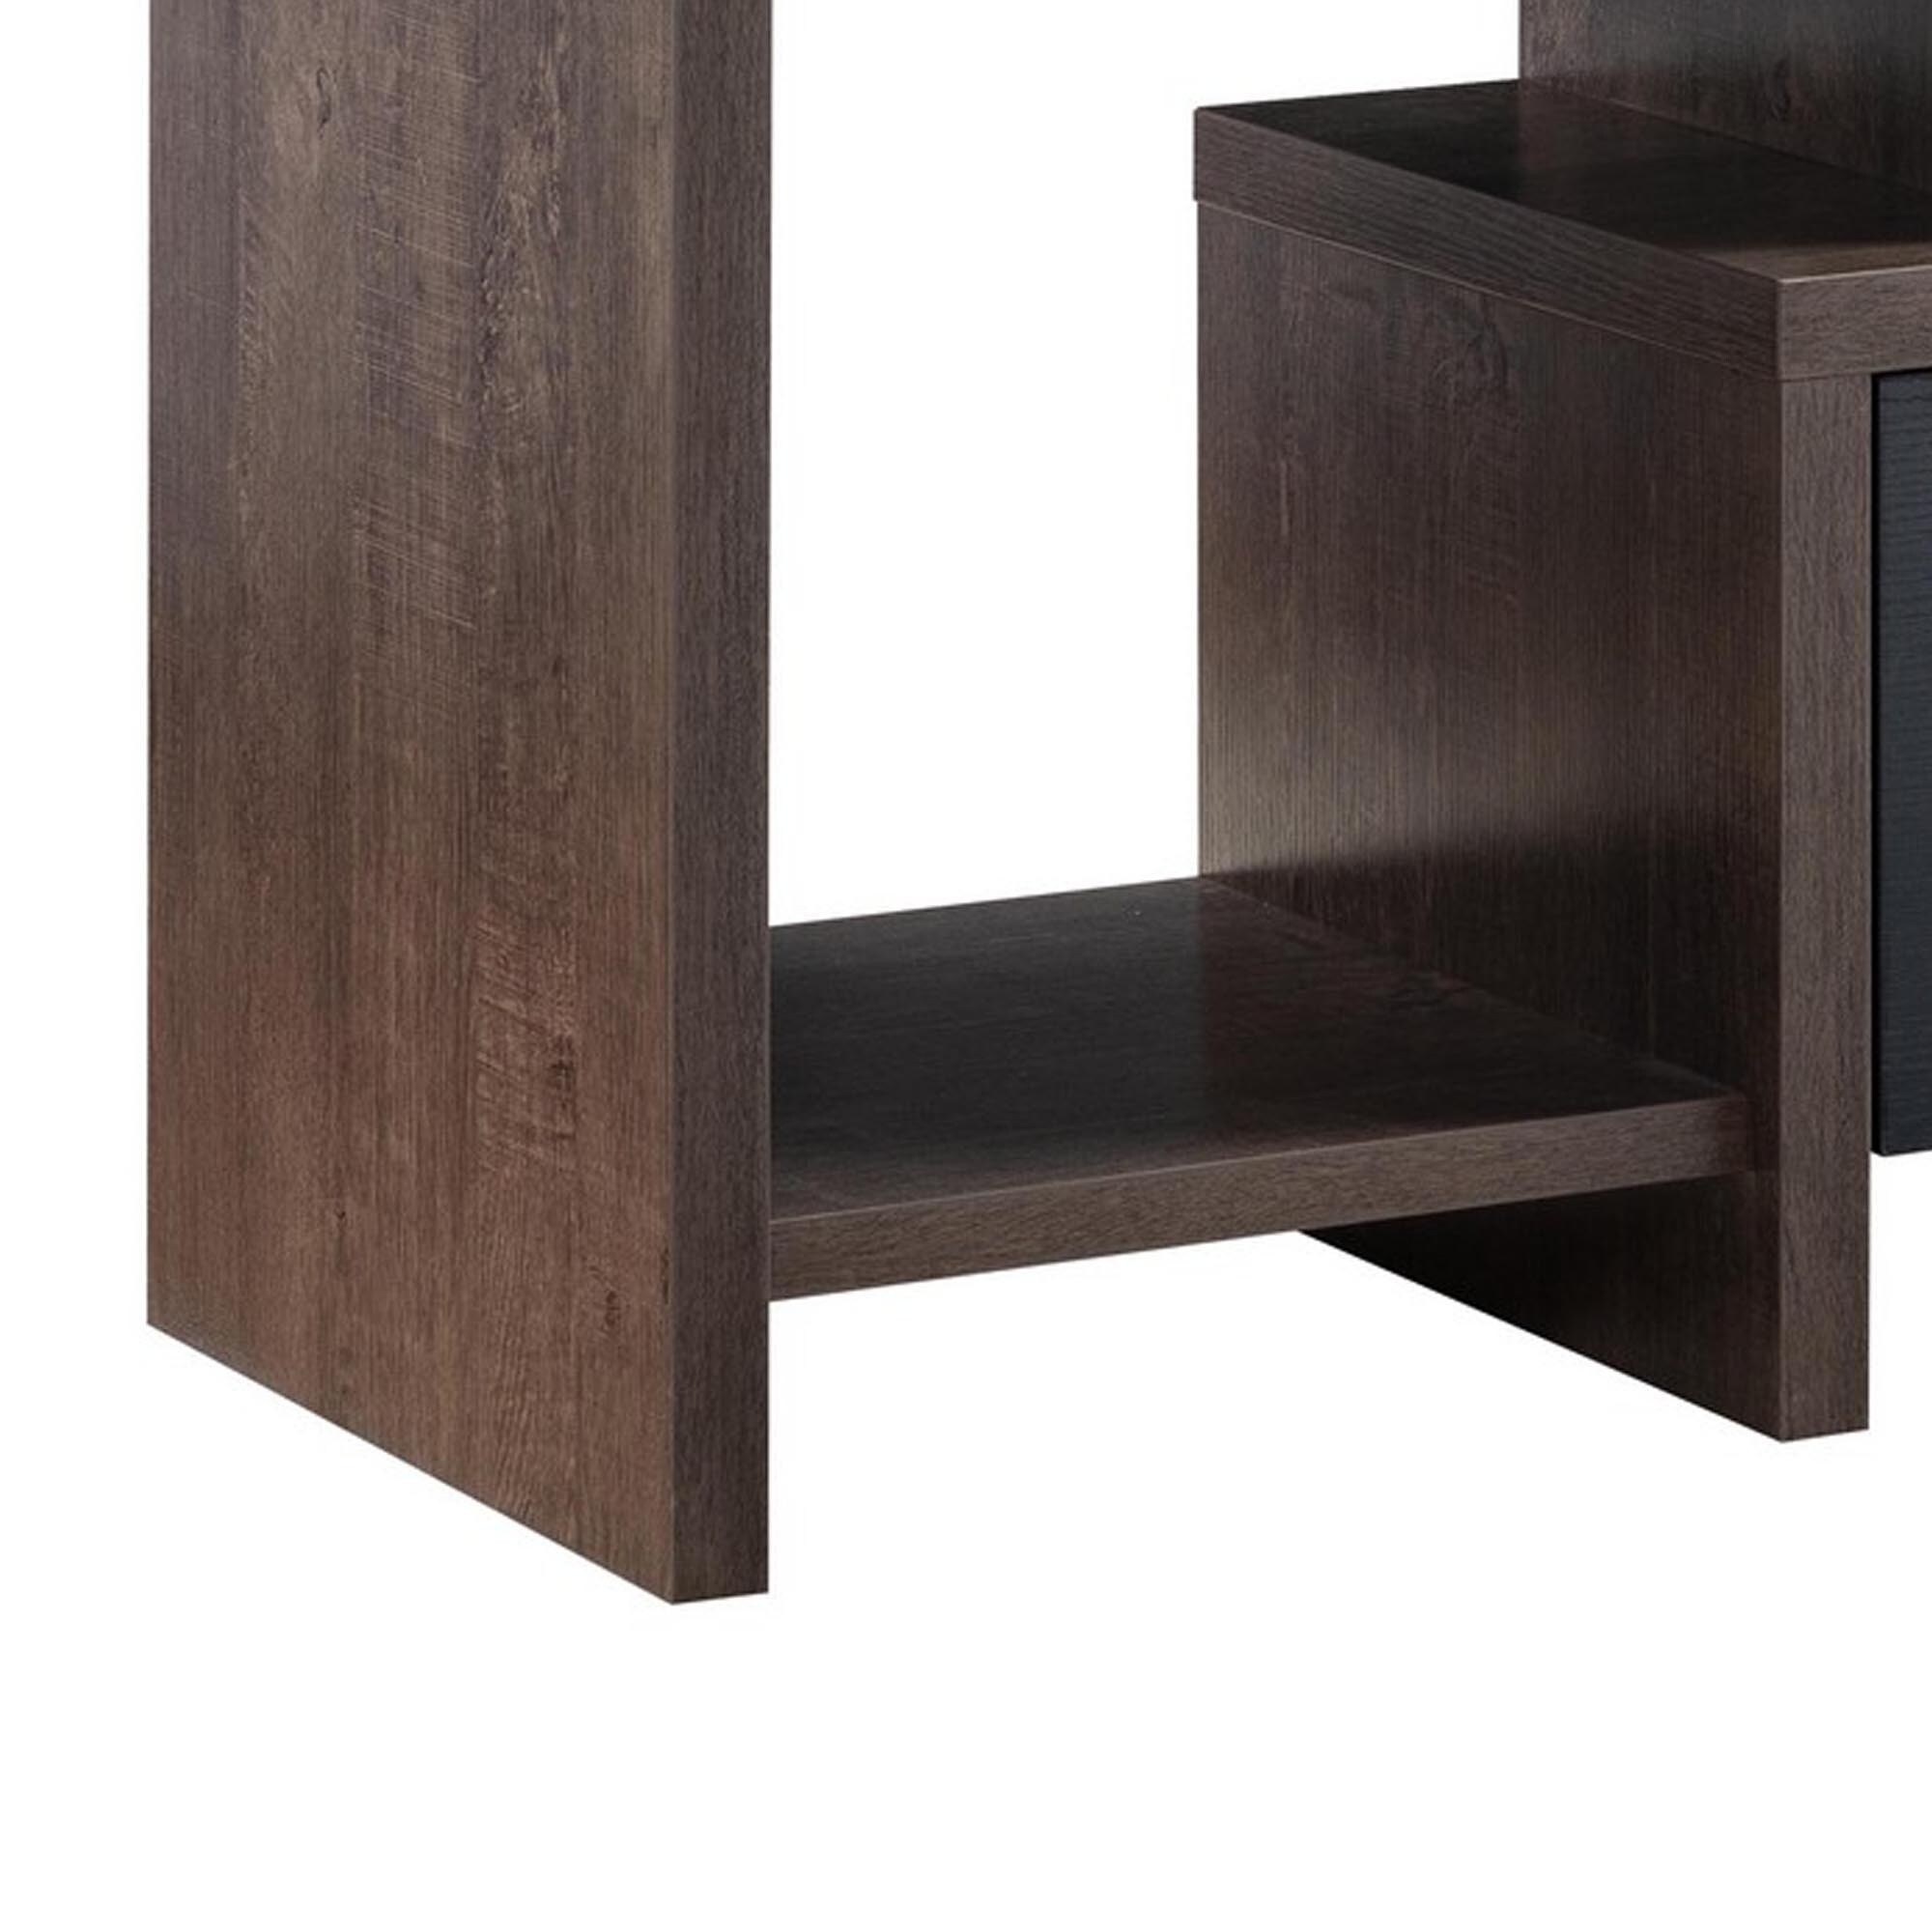 Elle 60 Inch TV Media Entertainment Console, 3 Compartments, Drawer, Walnut - image 3 of 5